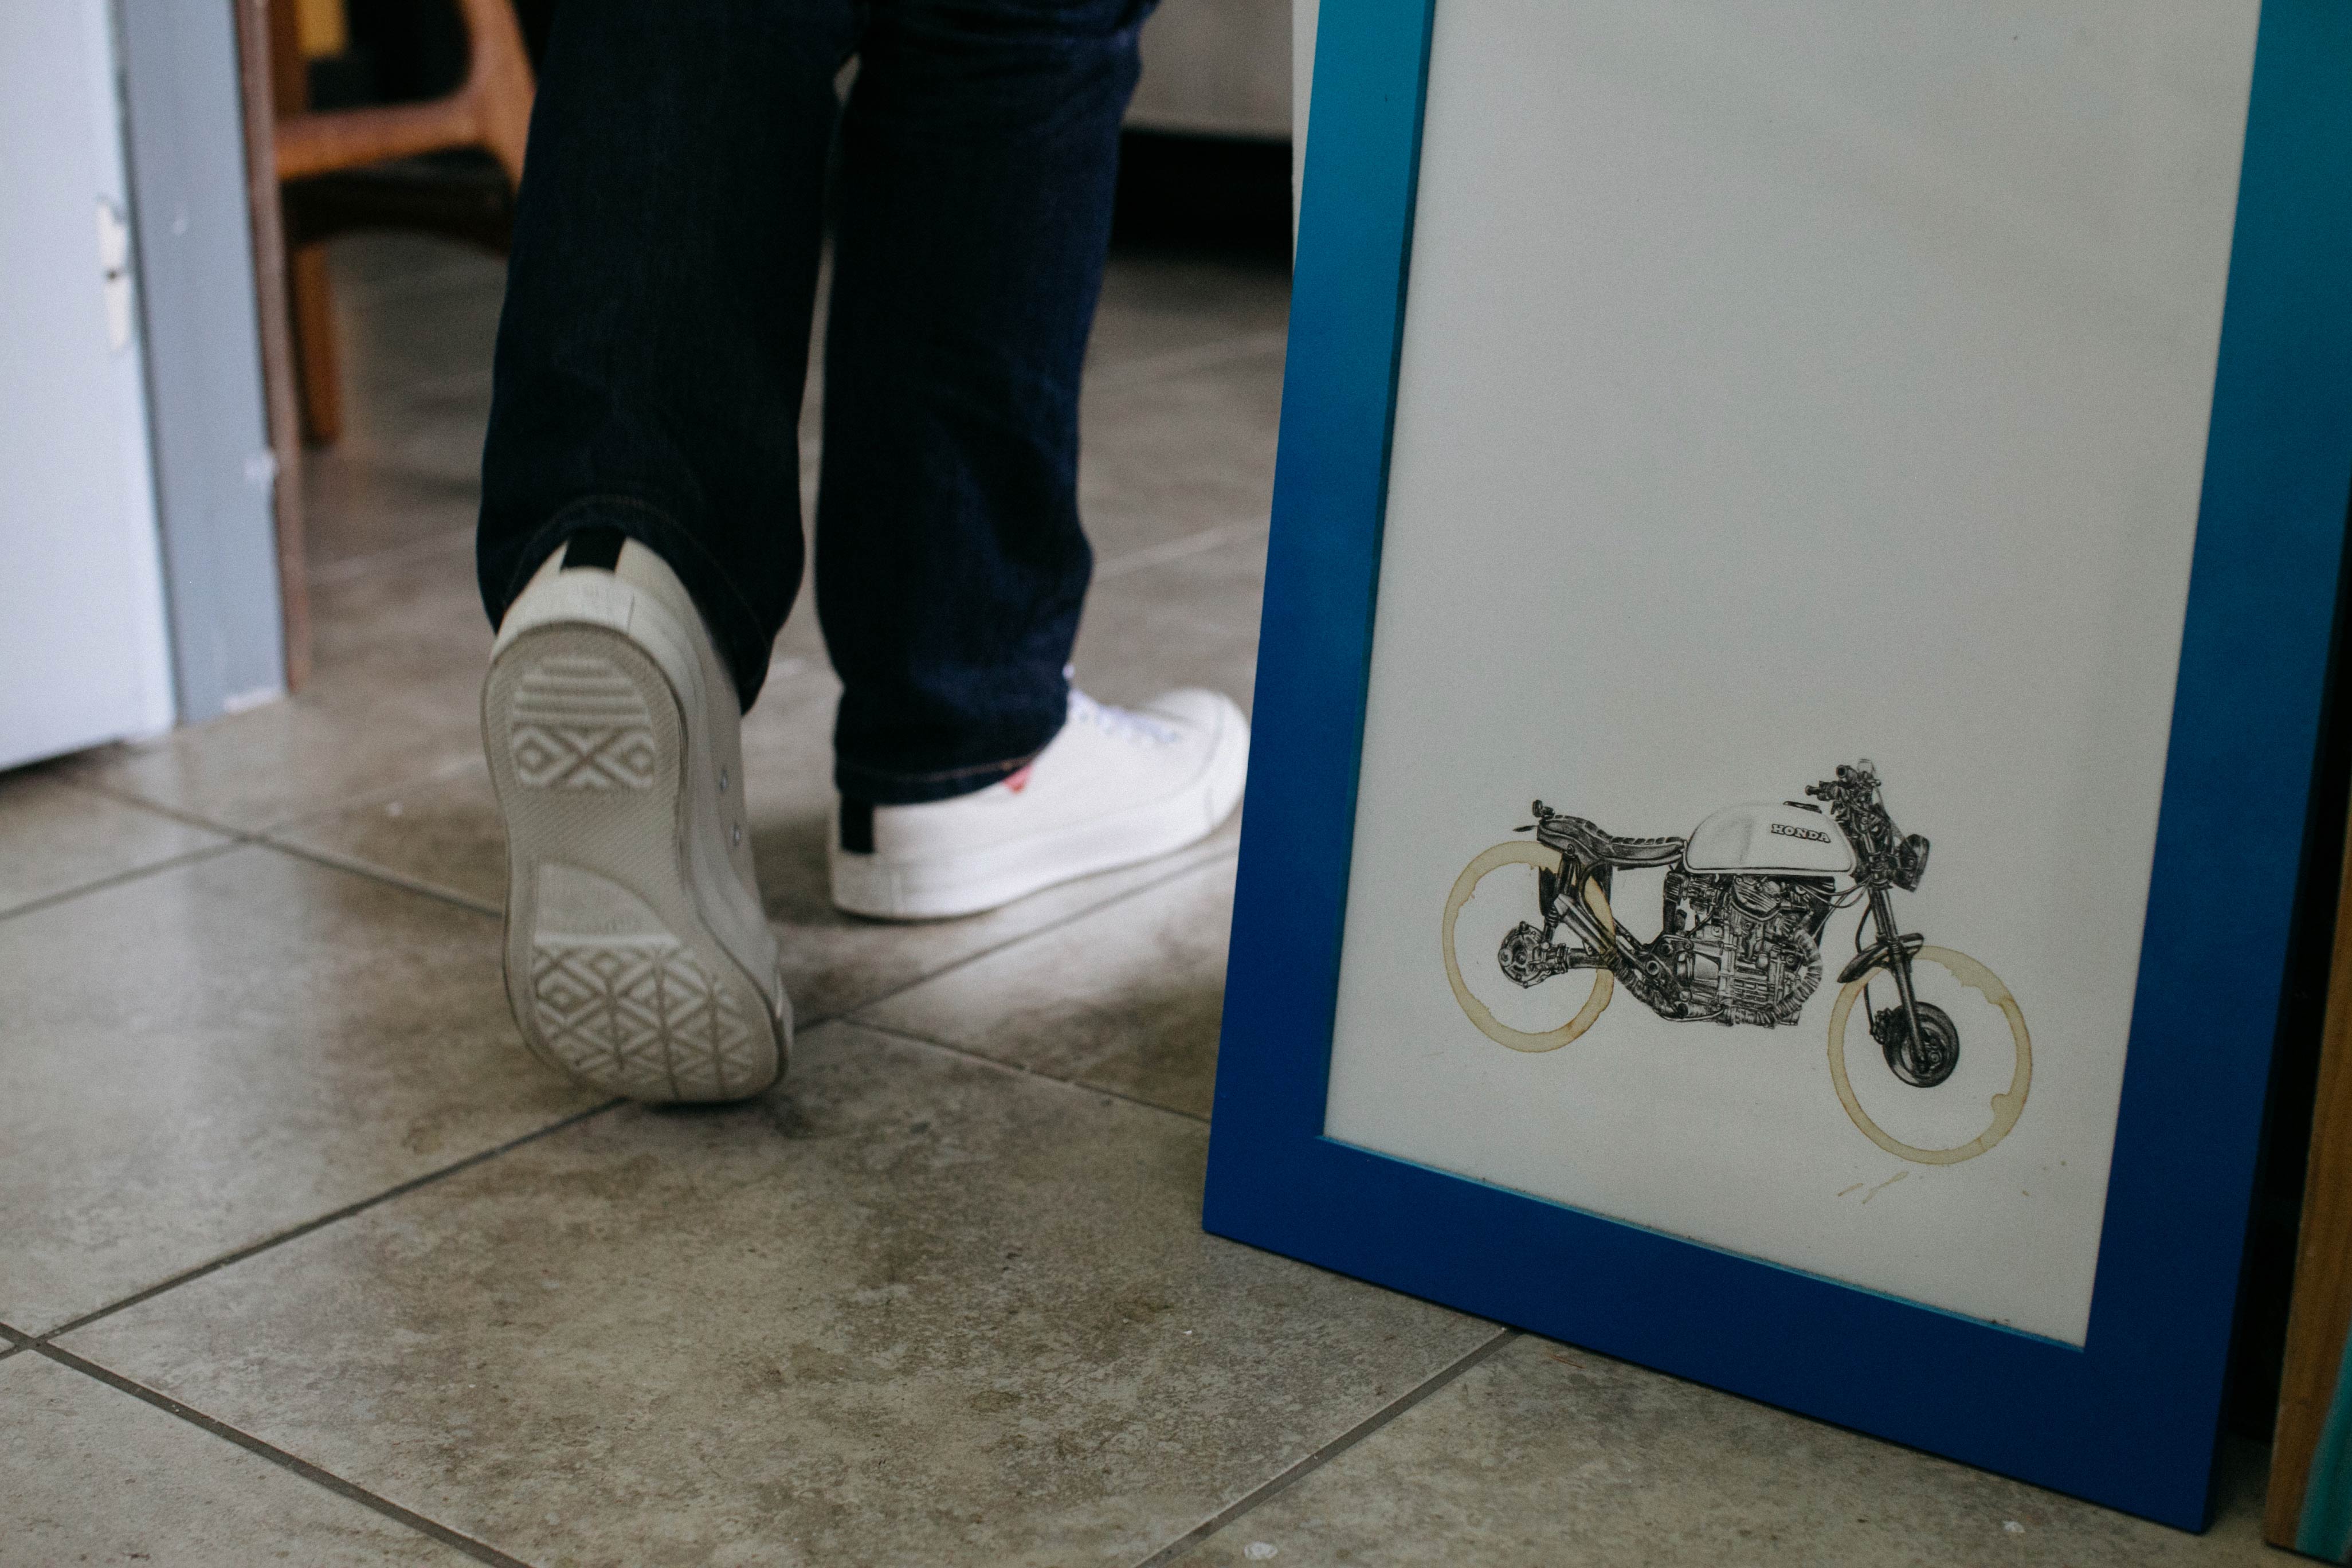 Framed print of a Carter Asmann coffee-stain motorcycle with Carter walking away from the camera in the background.